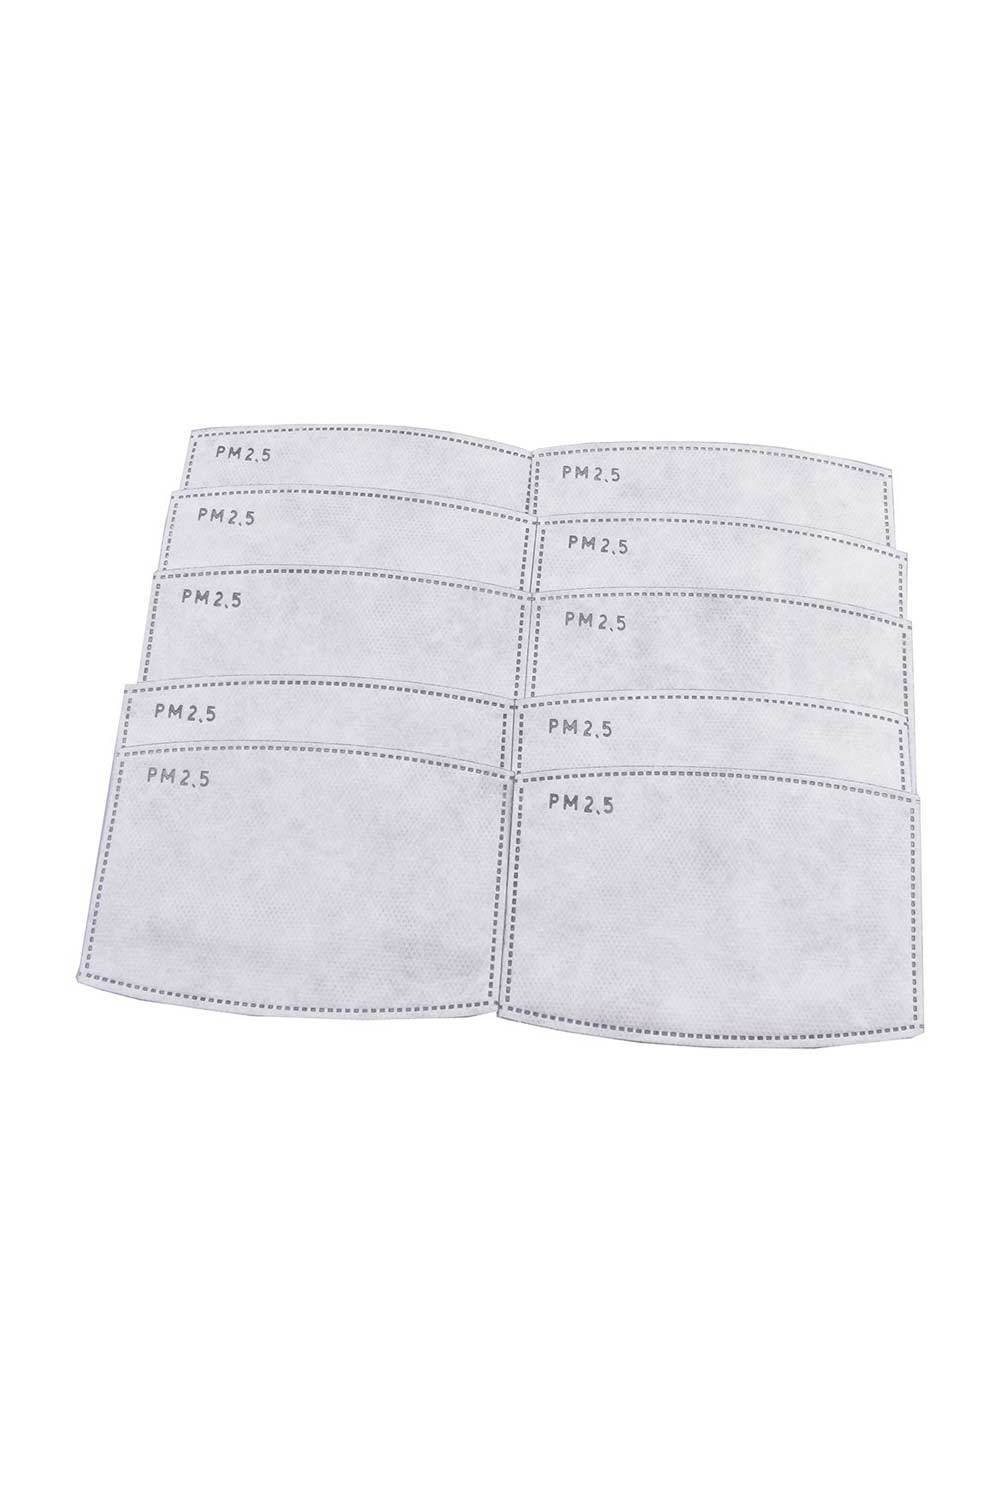 PM 2.5 Replacement Filters - 10 Pack